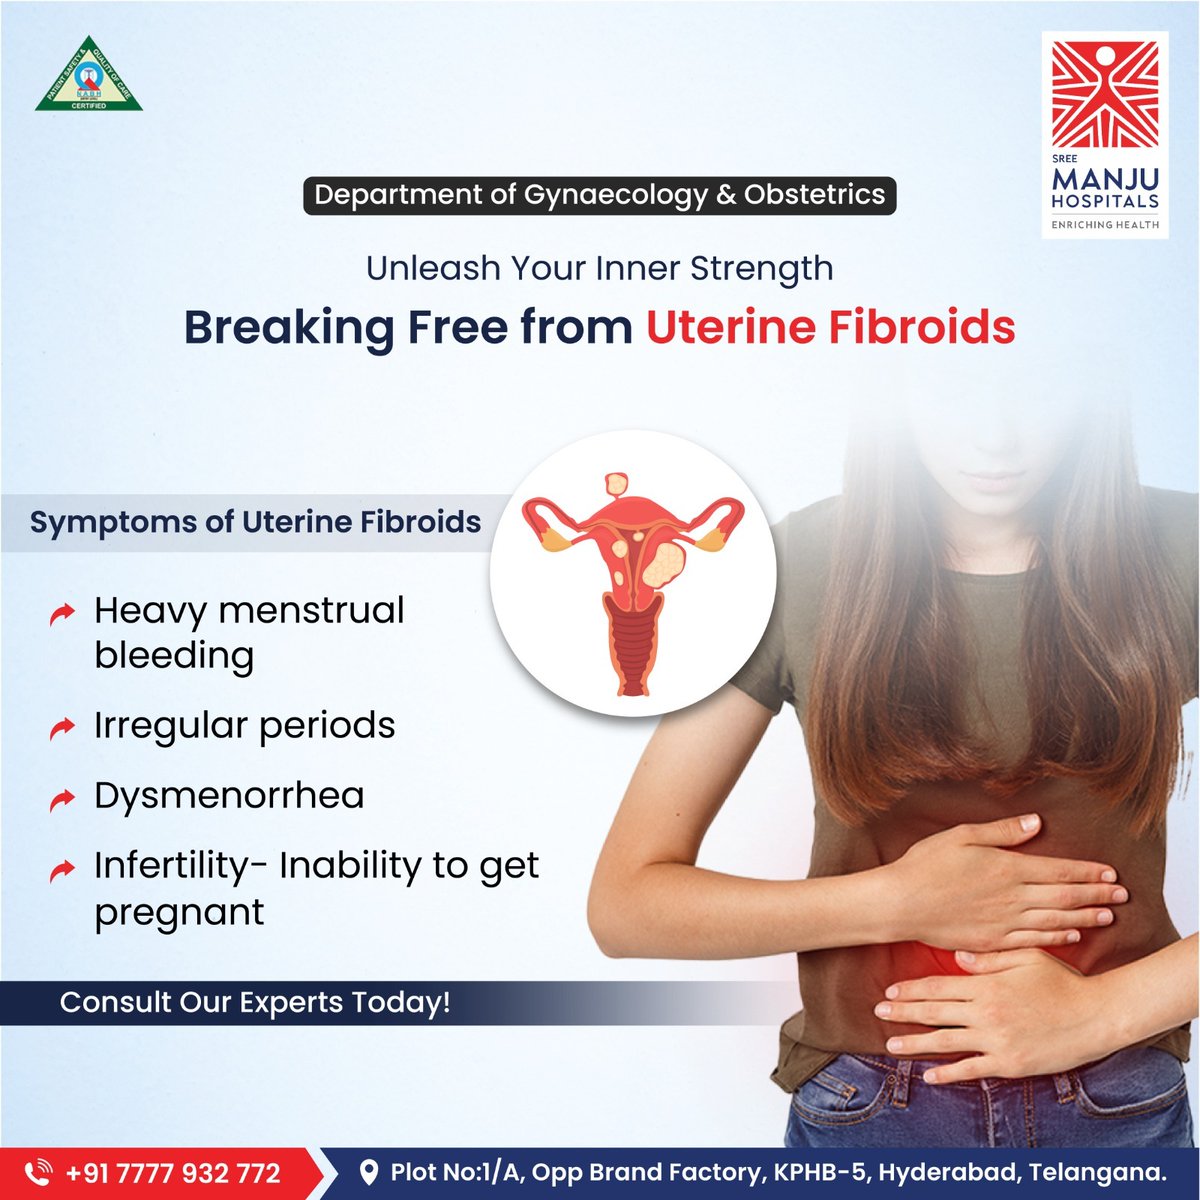 Early diagnosis is the first step for treatment. Our dedicated team of experts understands the challenges posed by uterine fibroids and is committed to providing personalized care and innovative treatments. 

#gynecologist #gynecology #gynecologyandobstetrics #UterineFibroid